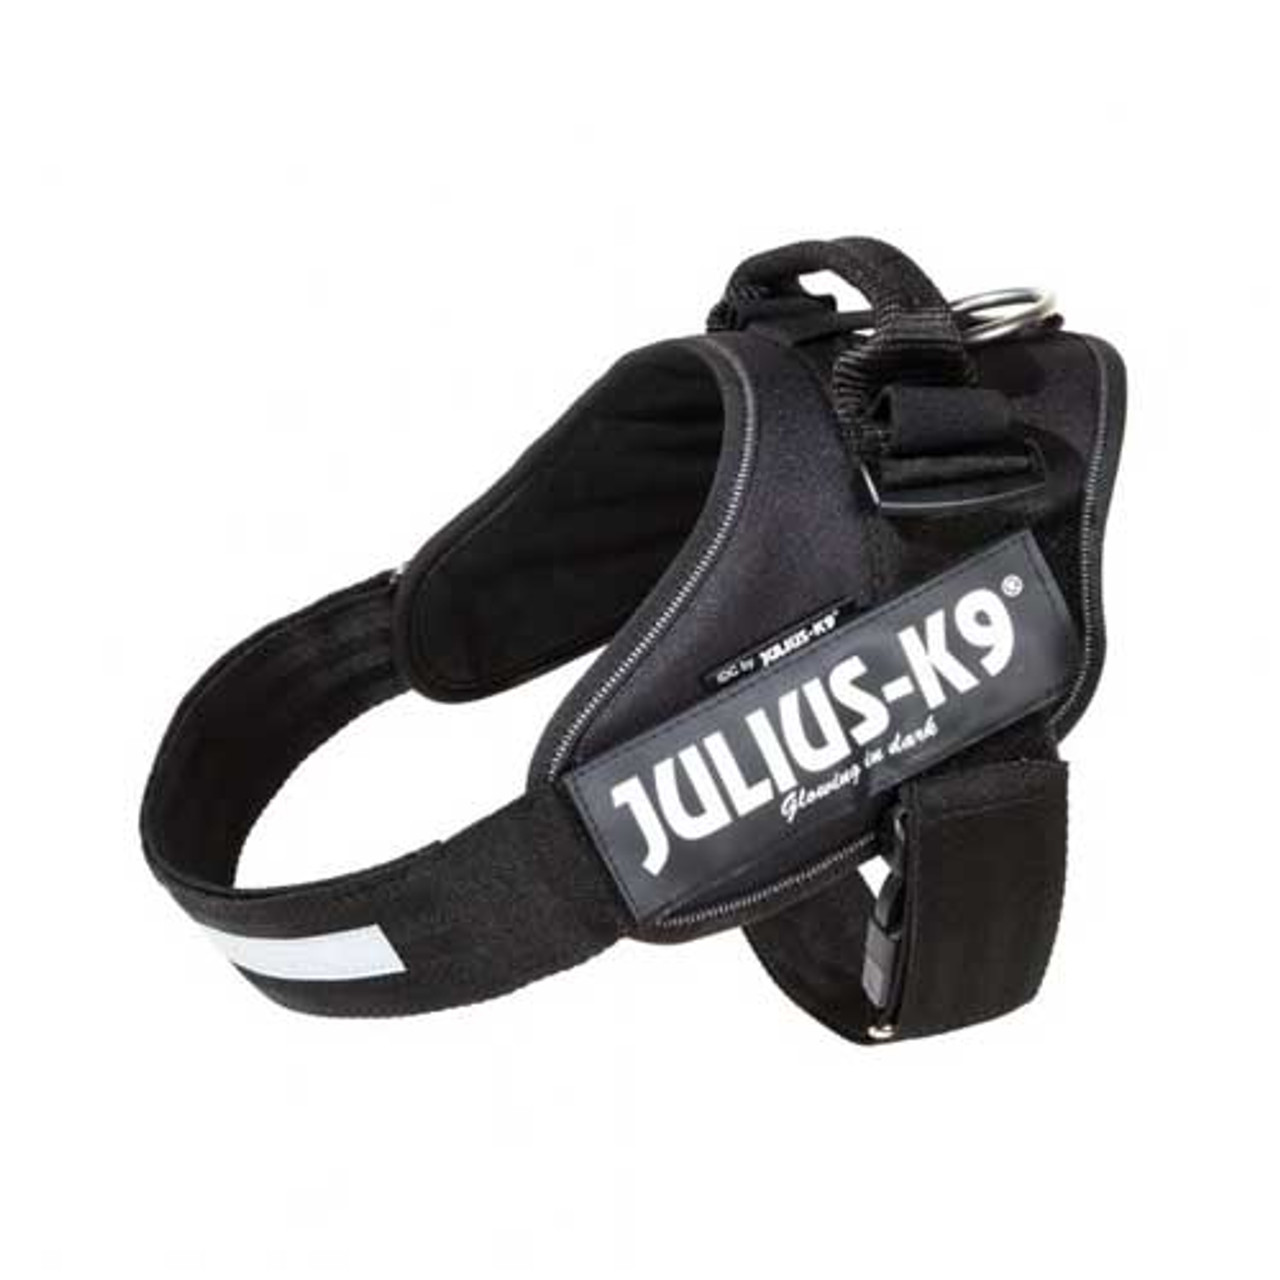 Julius-K9 IDC-Powerharness For Dogs with K9 Security Lock Size: 0, Black